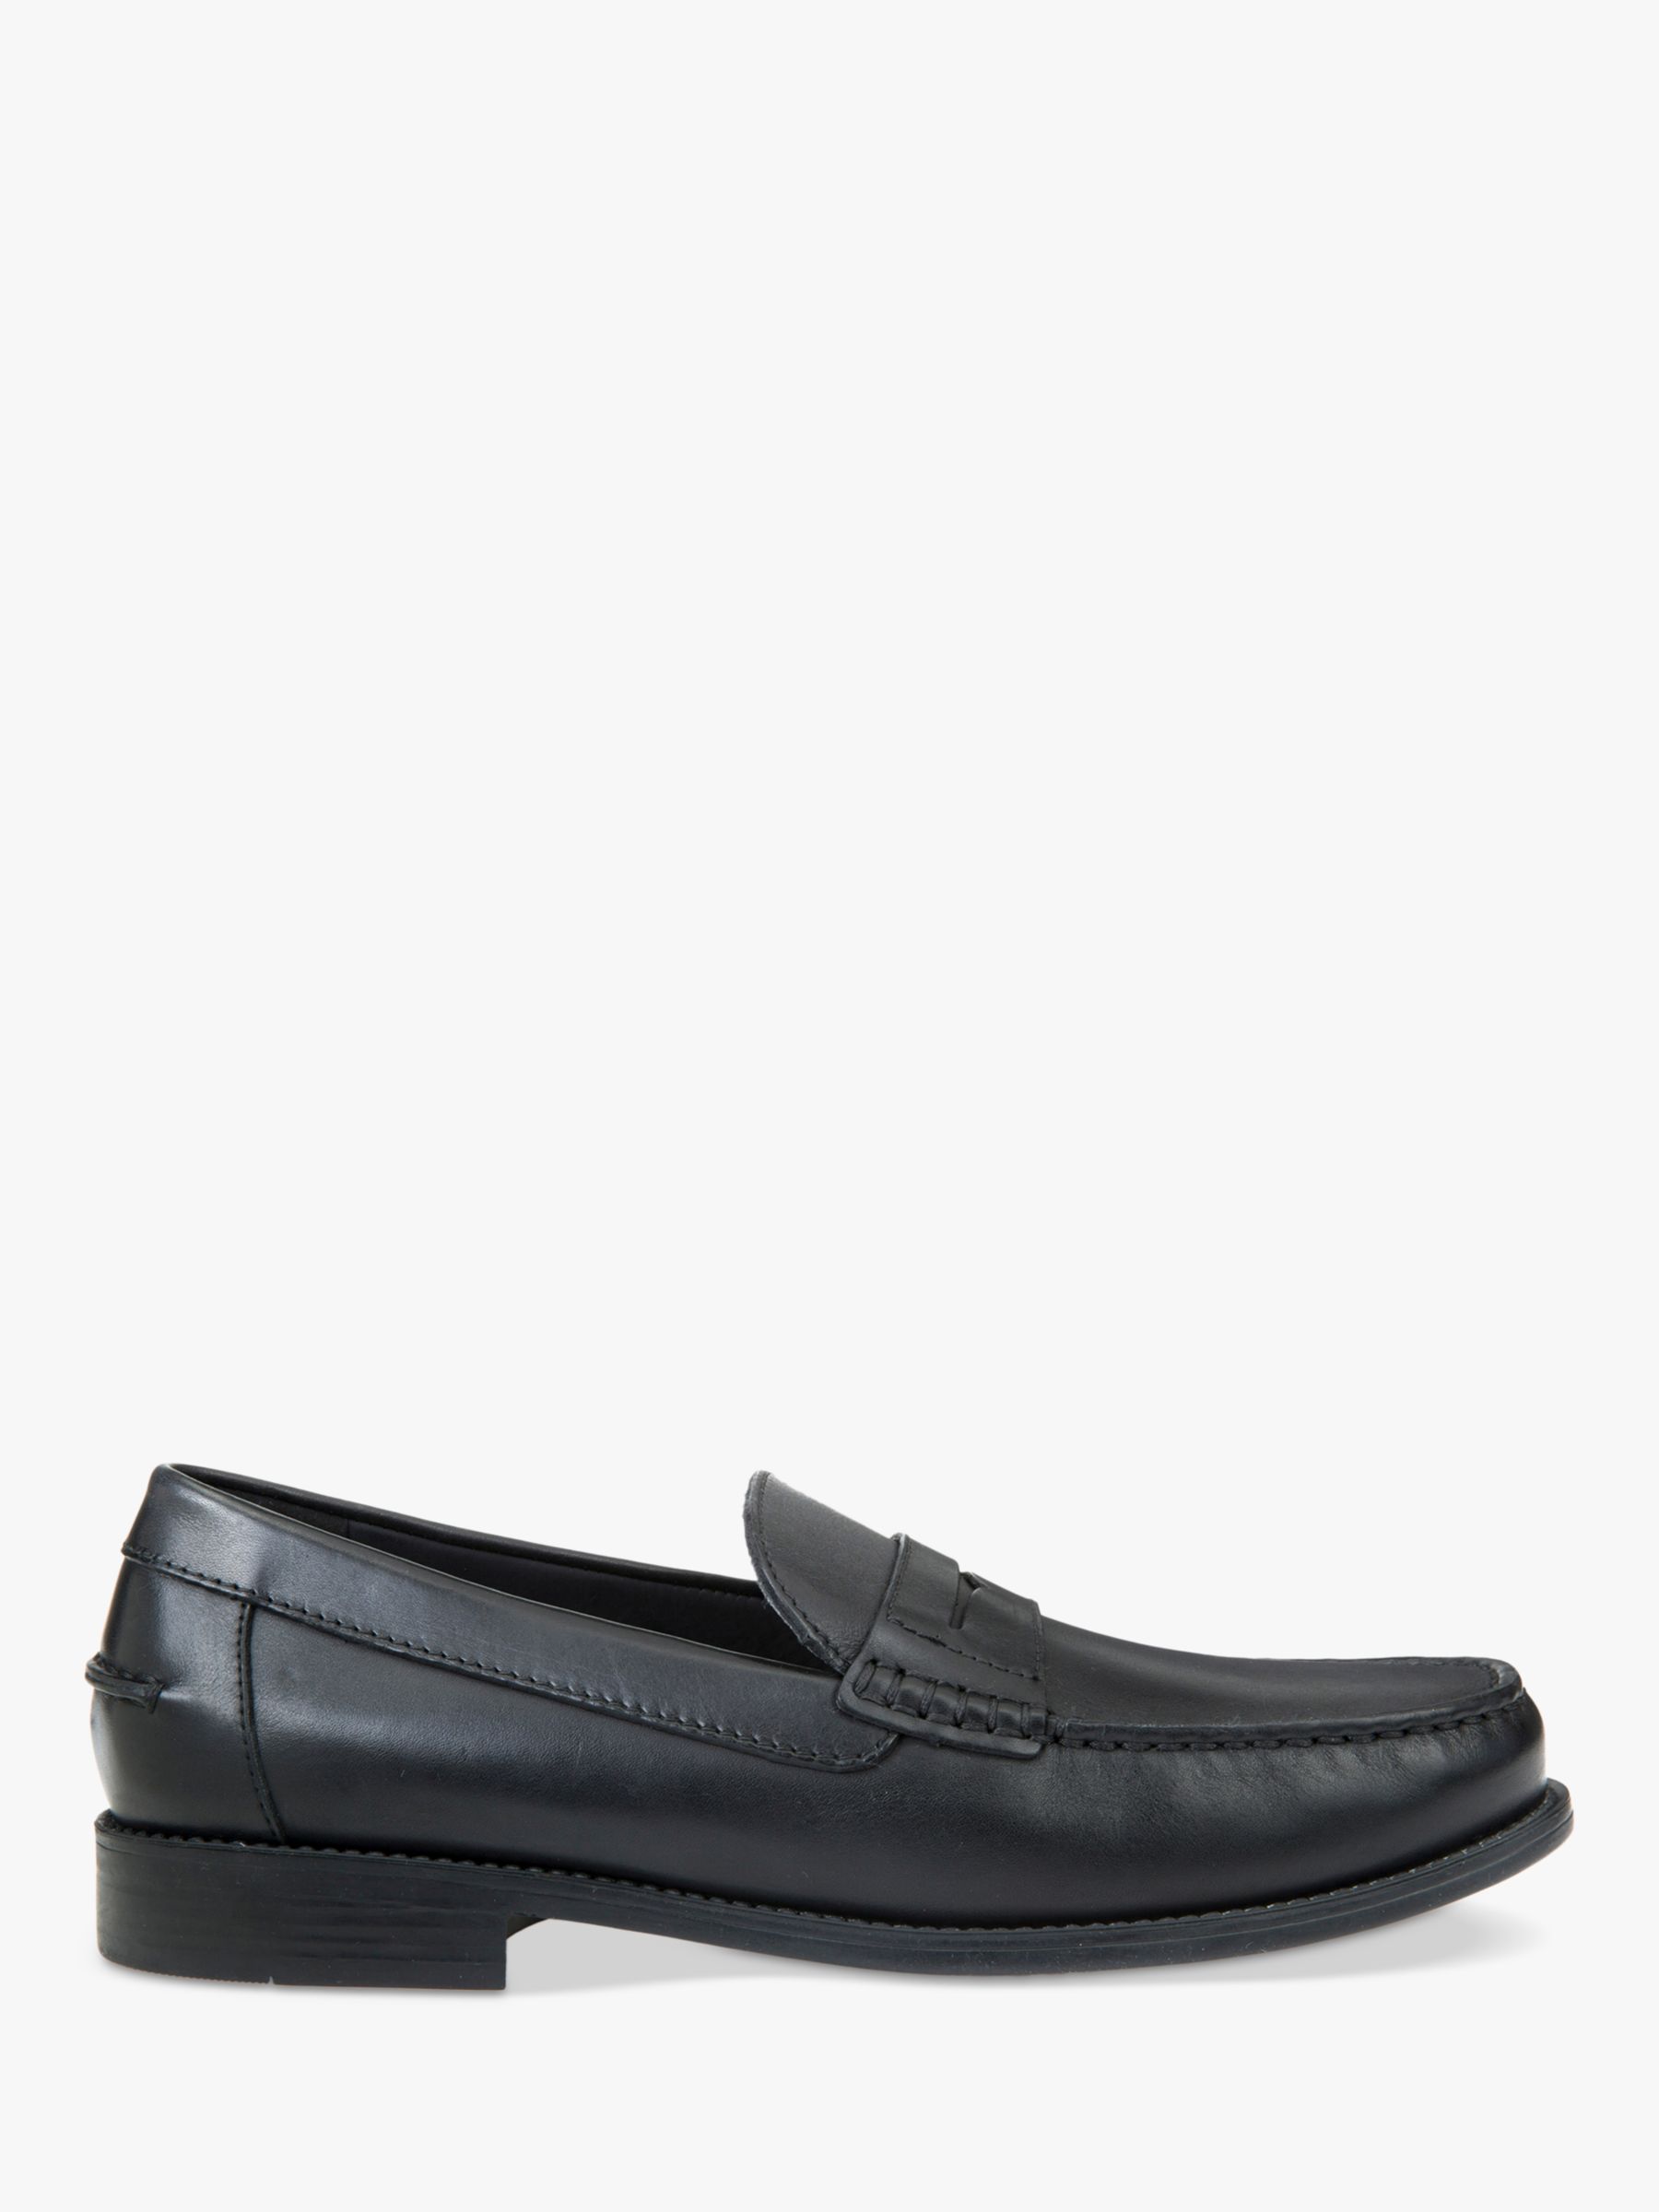 Geox New Damon Loafers, Black at John Lewis & Partners